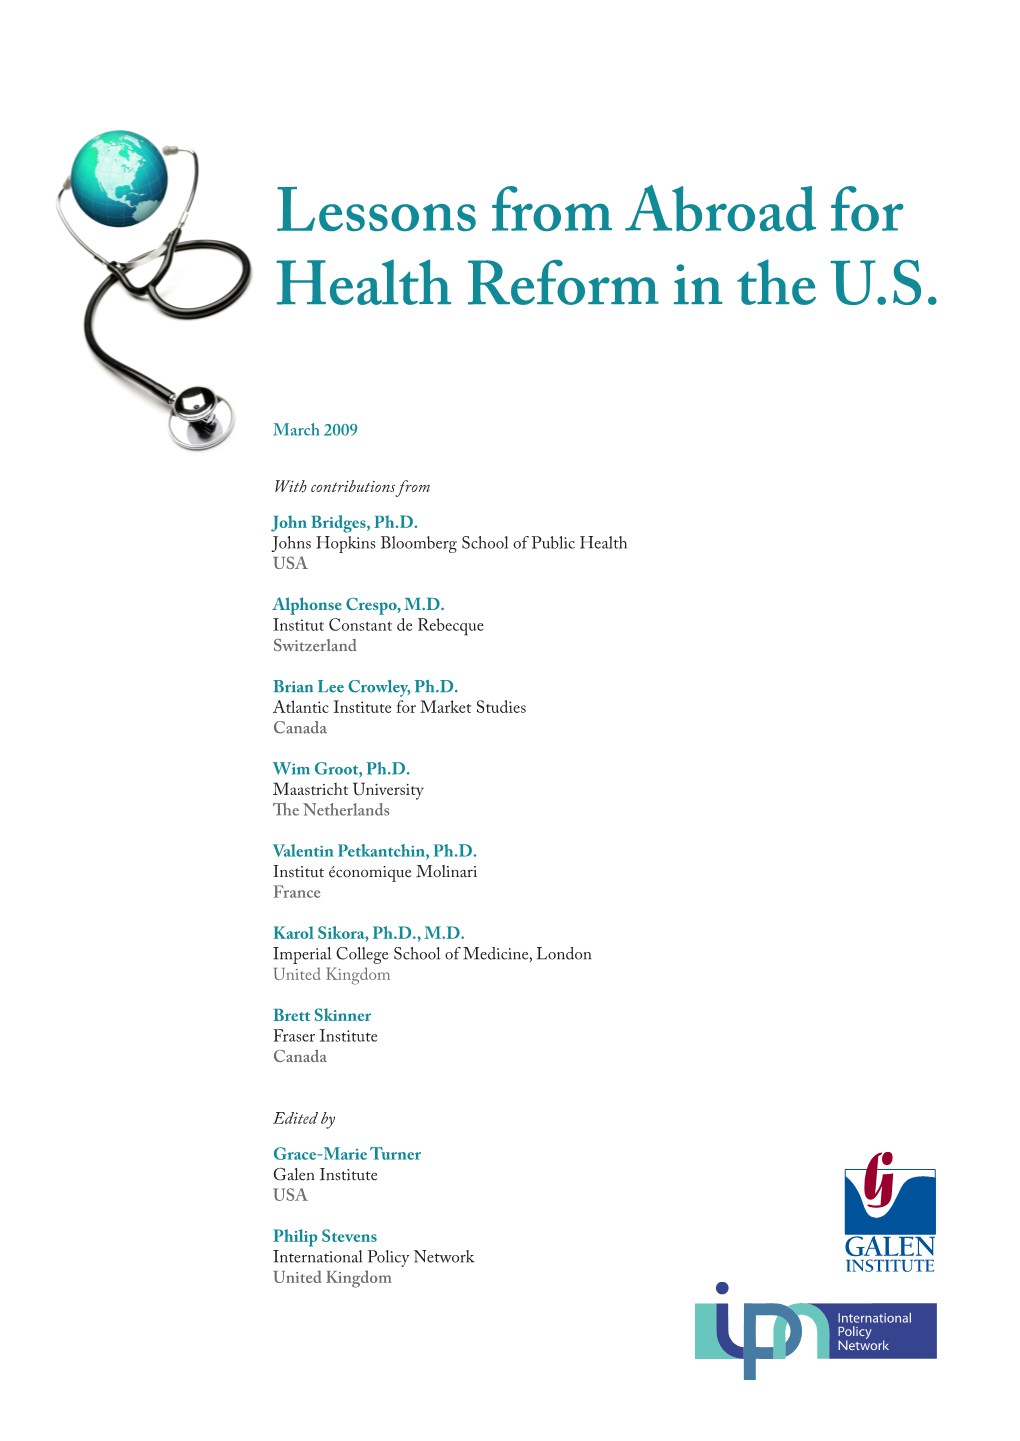 Lessons from Abroad for Health Reform in the U.S